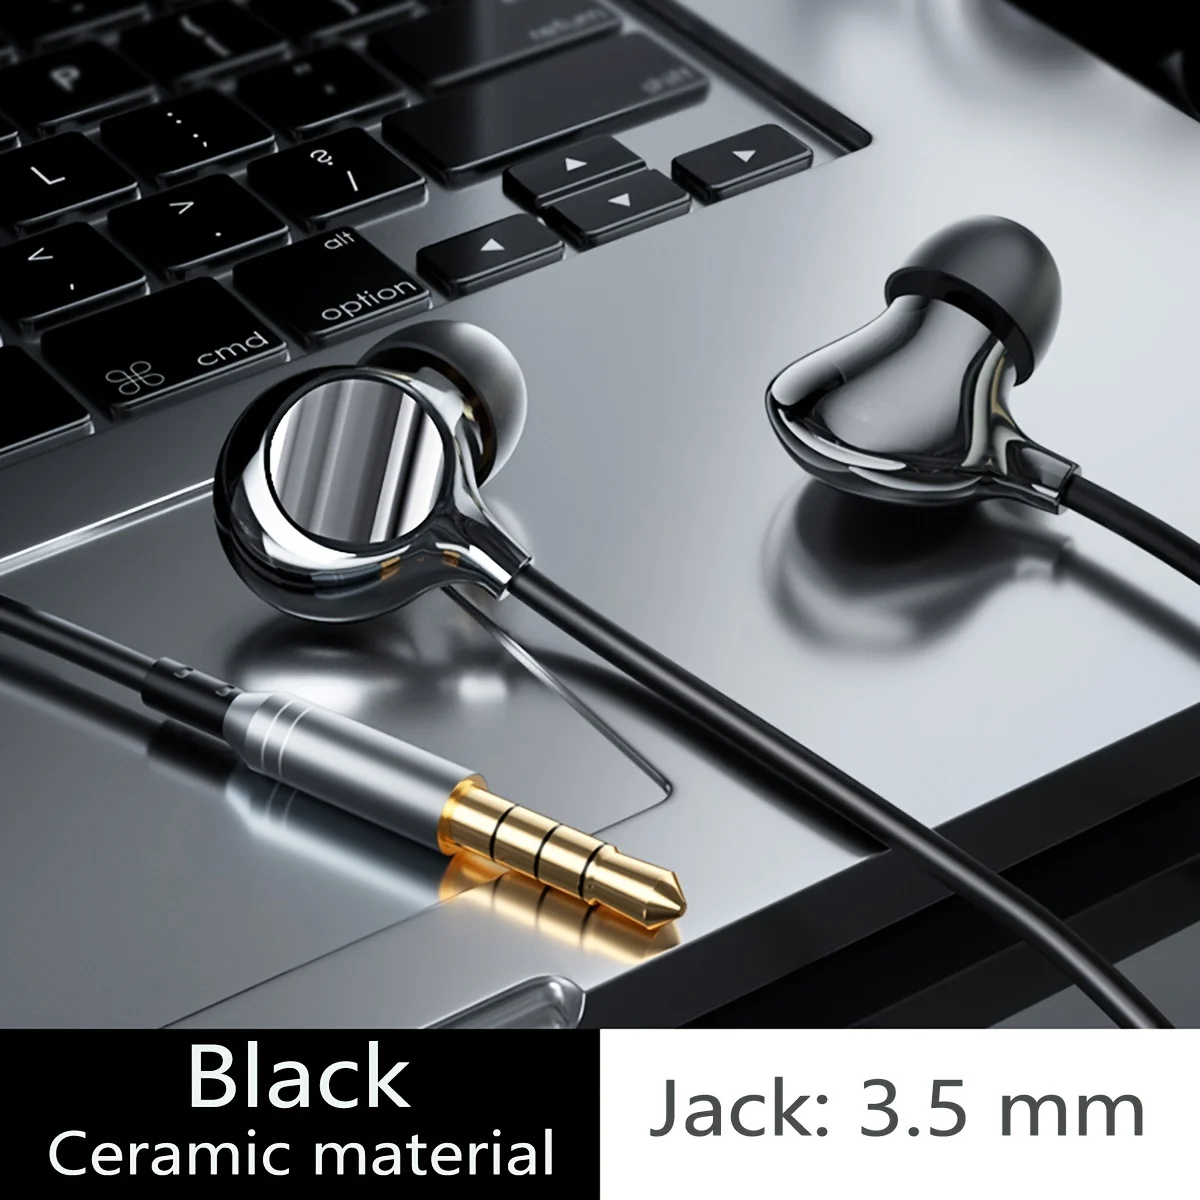 

Wired Earbuds, Earbud Headphones With Mic, Powerful Bass, Plastic Noise Cancelling Lightweight, Hi-Res Audio, Comfort